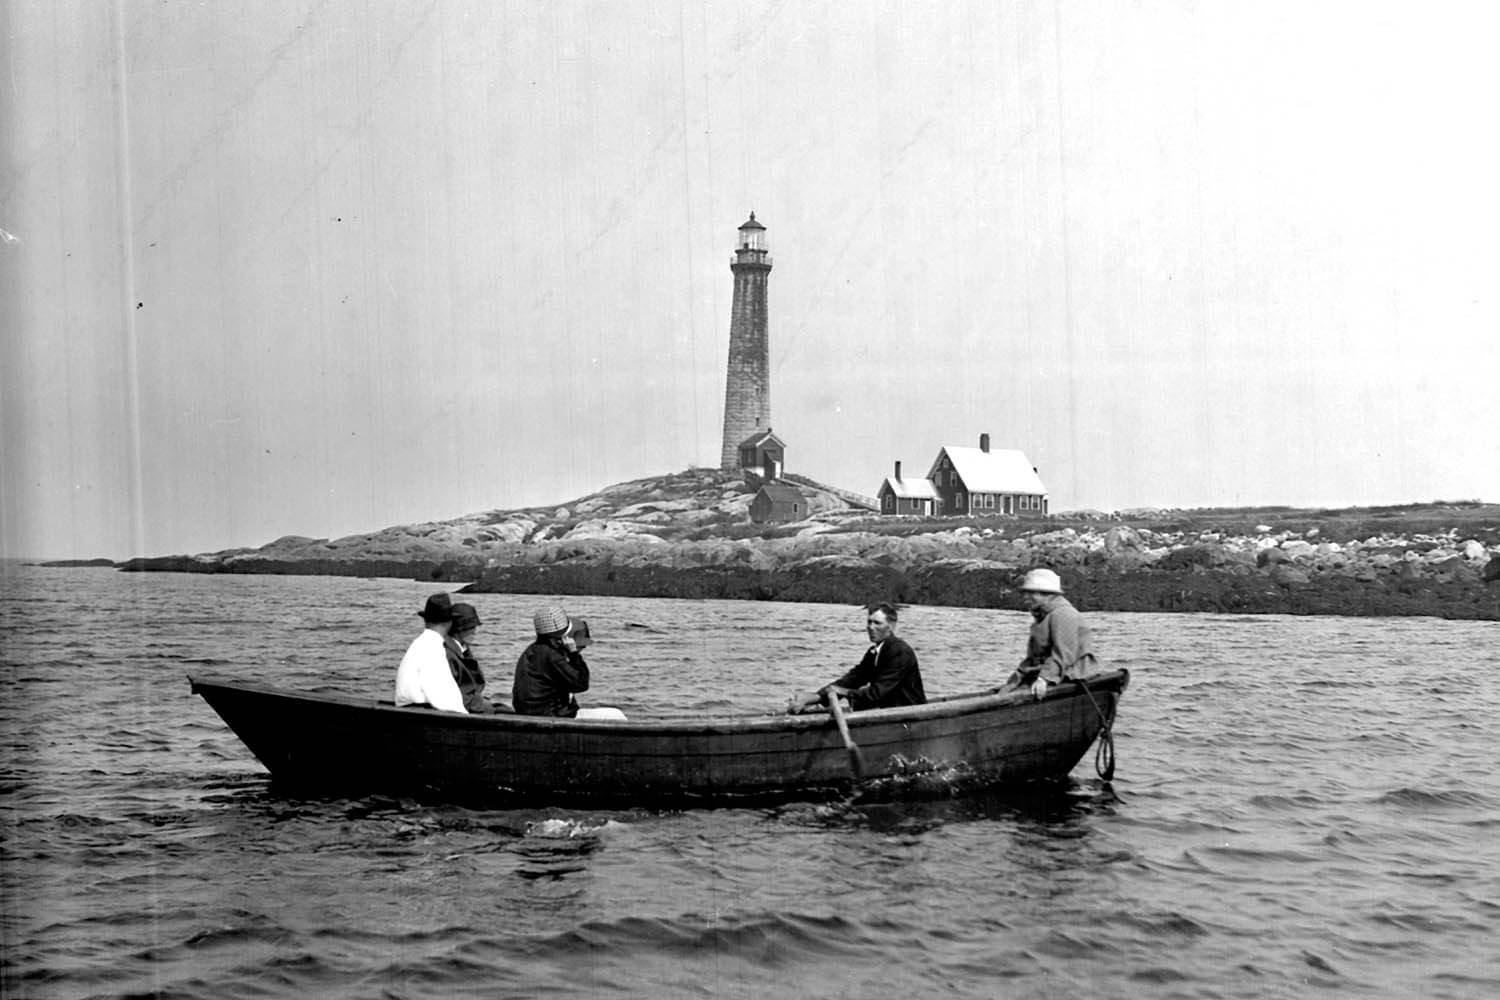 Visitors arrive from Loblolly Cove c.1930.